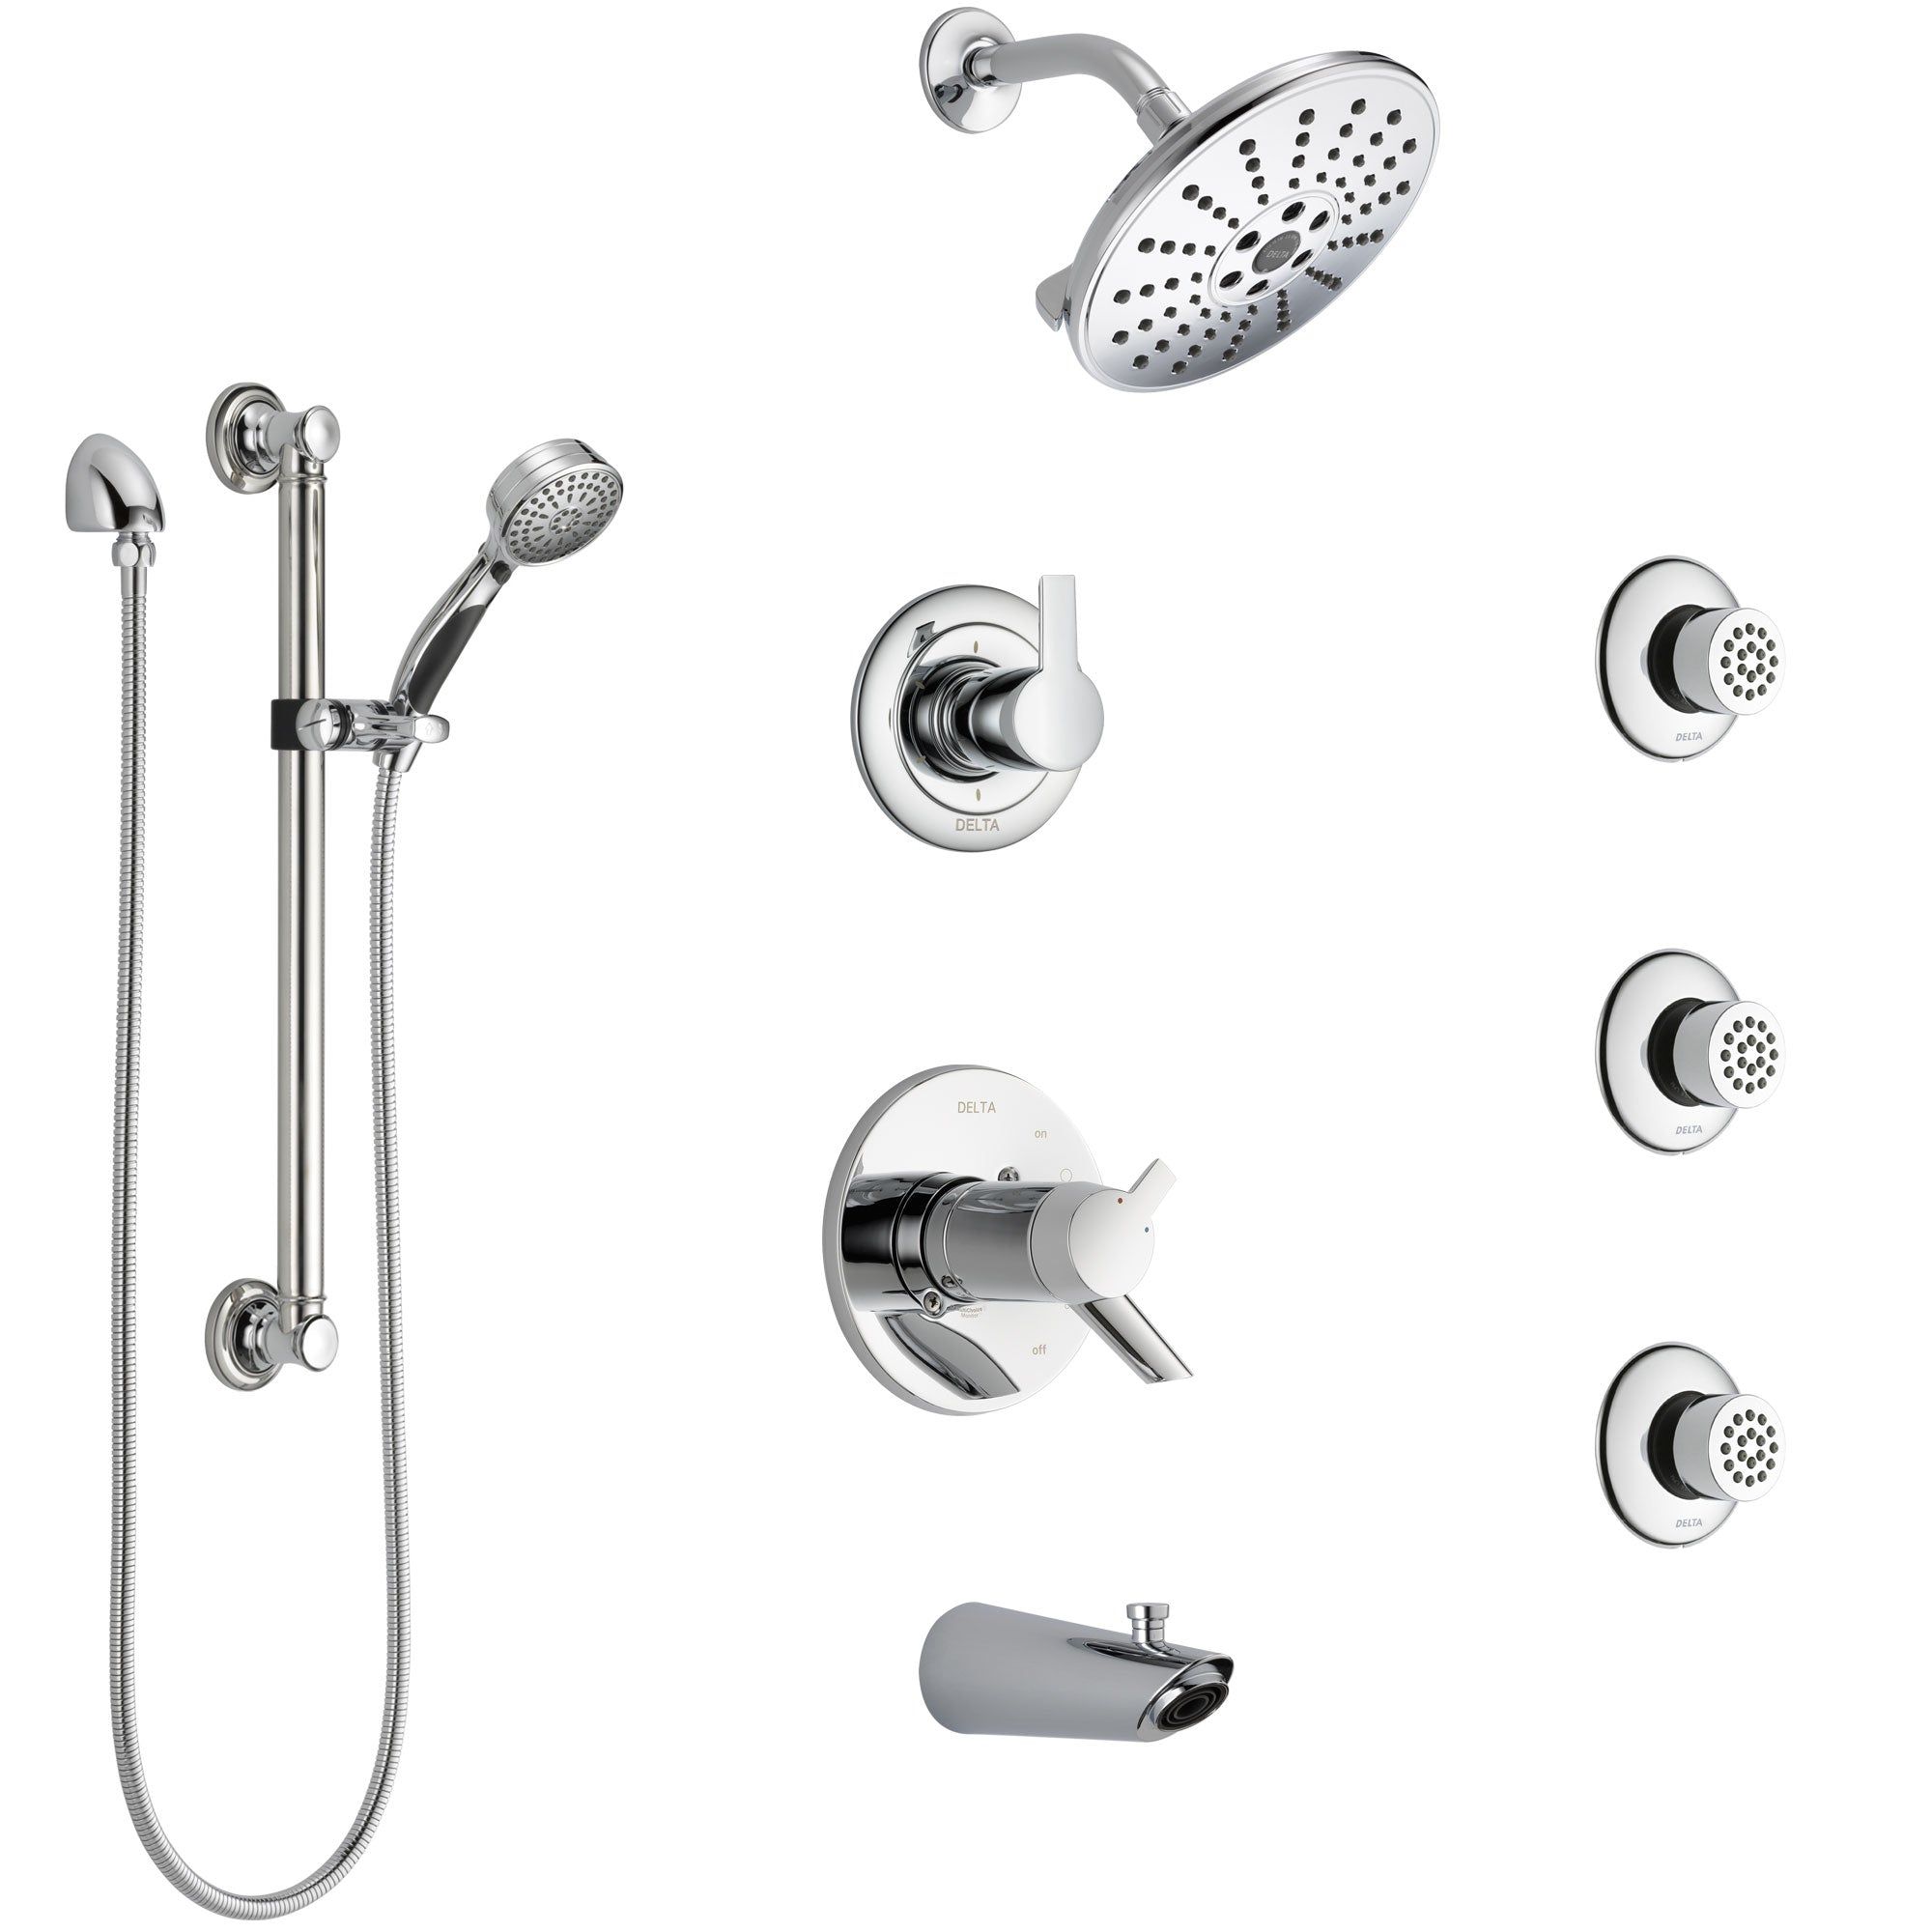 Delta Compel Chrome Dual Thermostatic Control Tub and Shower System, Diverter, Showerhead, 3 Body Sprays, and Hand Shower with Grab Bar SS17T46121